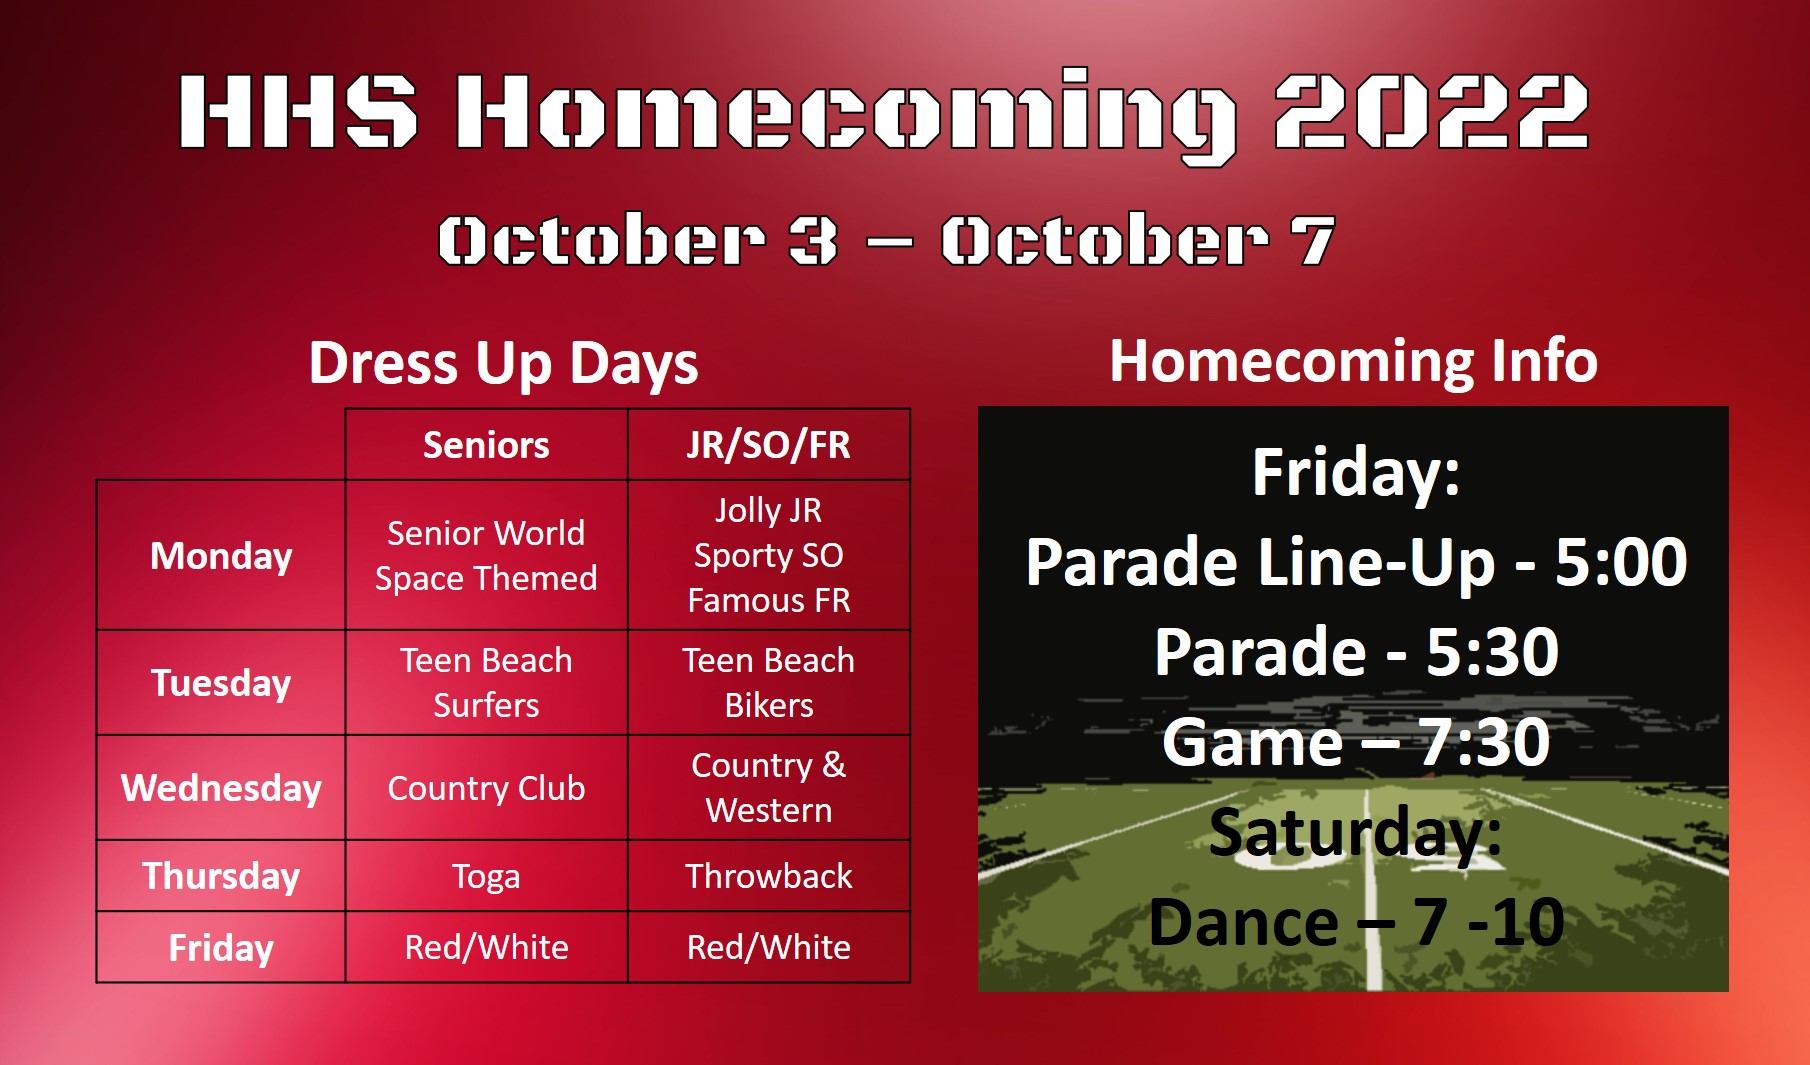 home coming info 2022